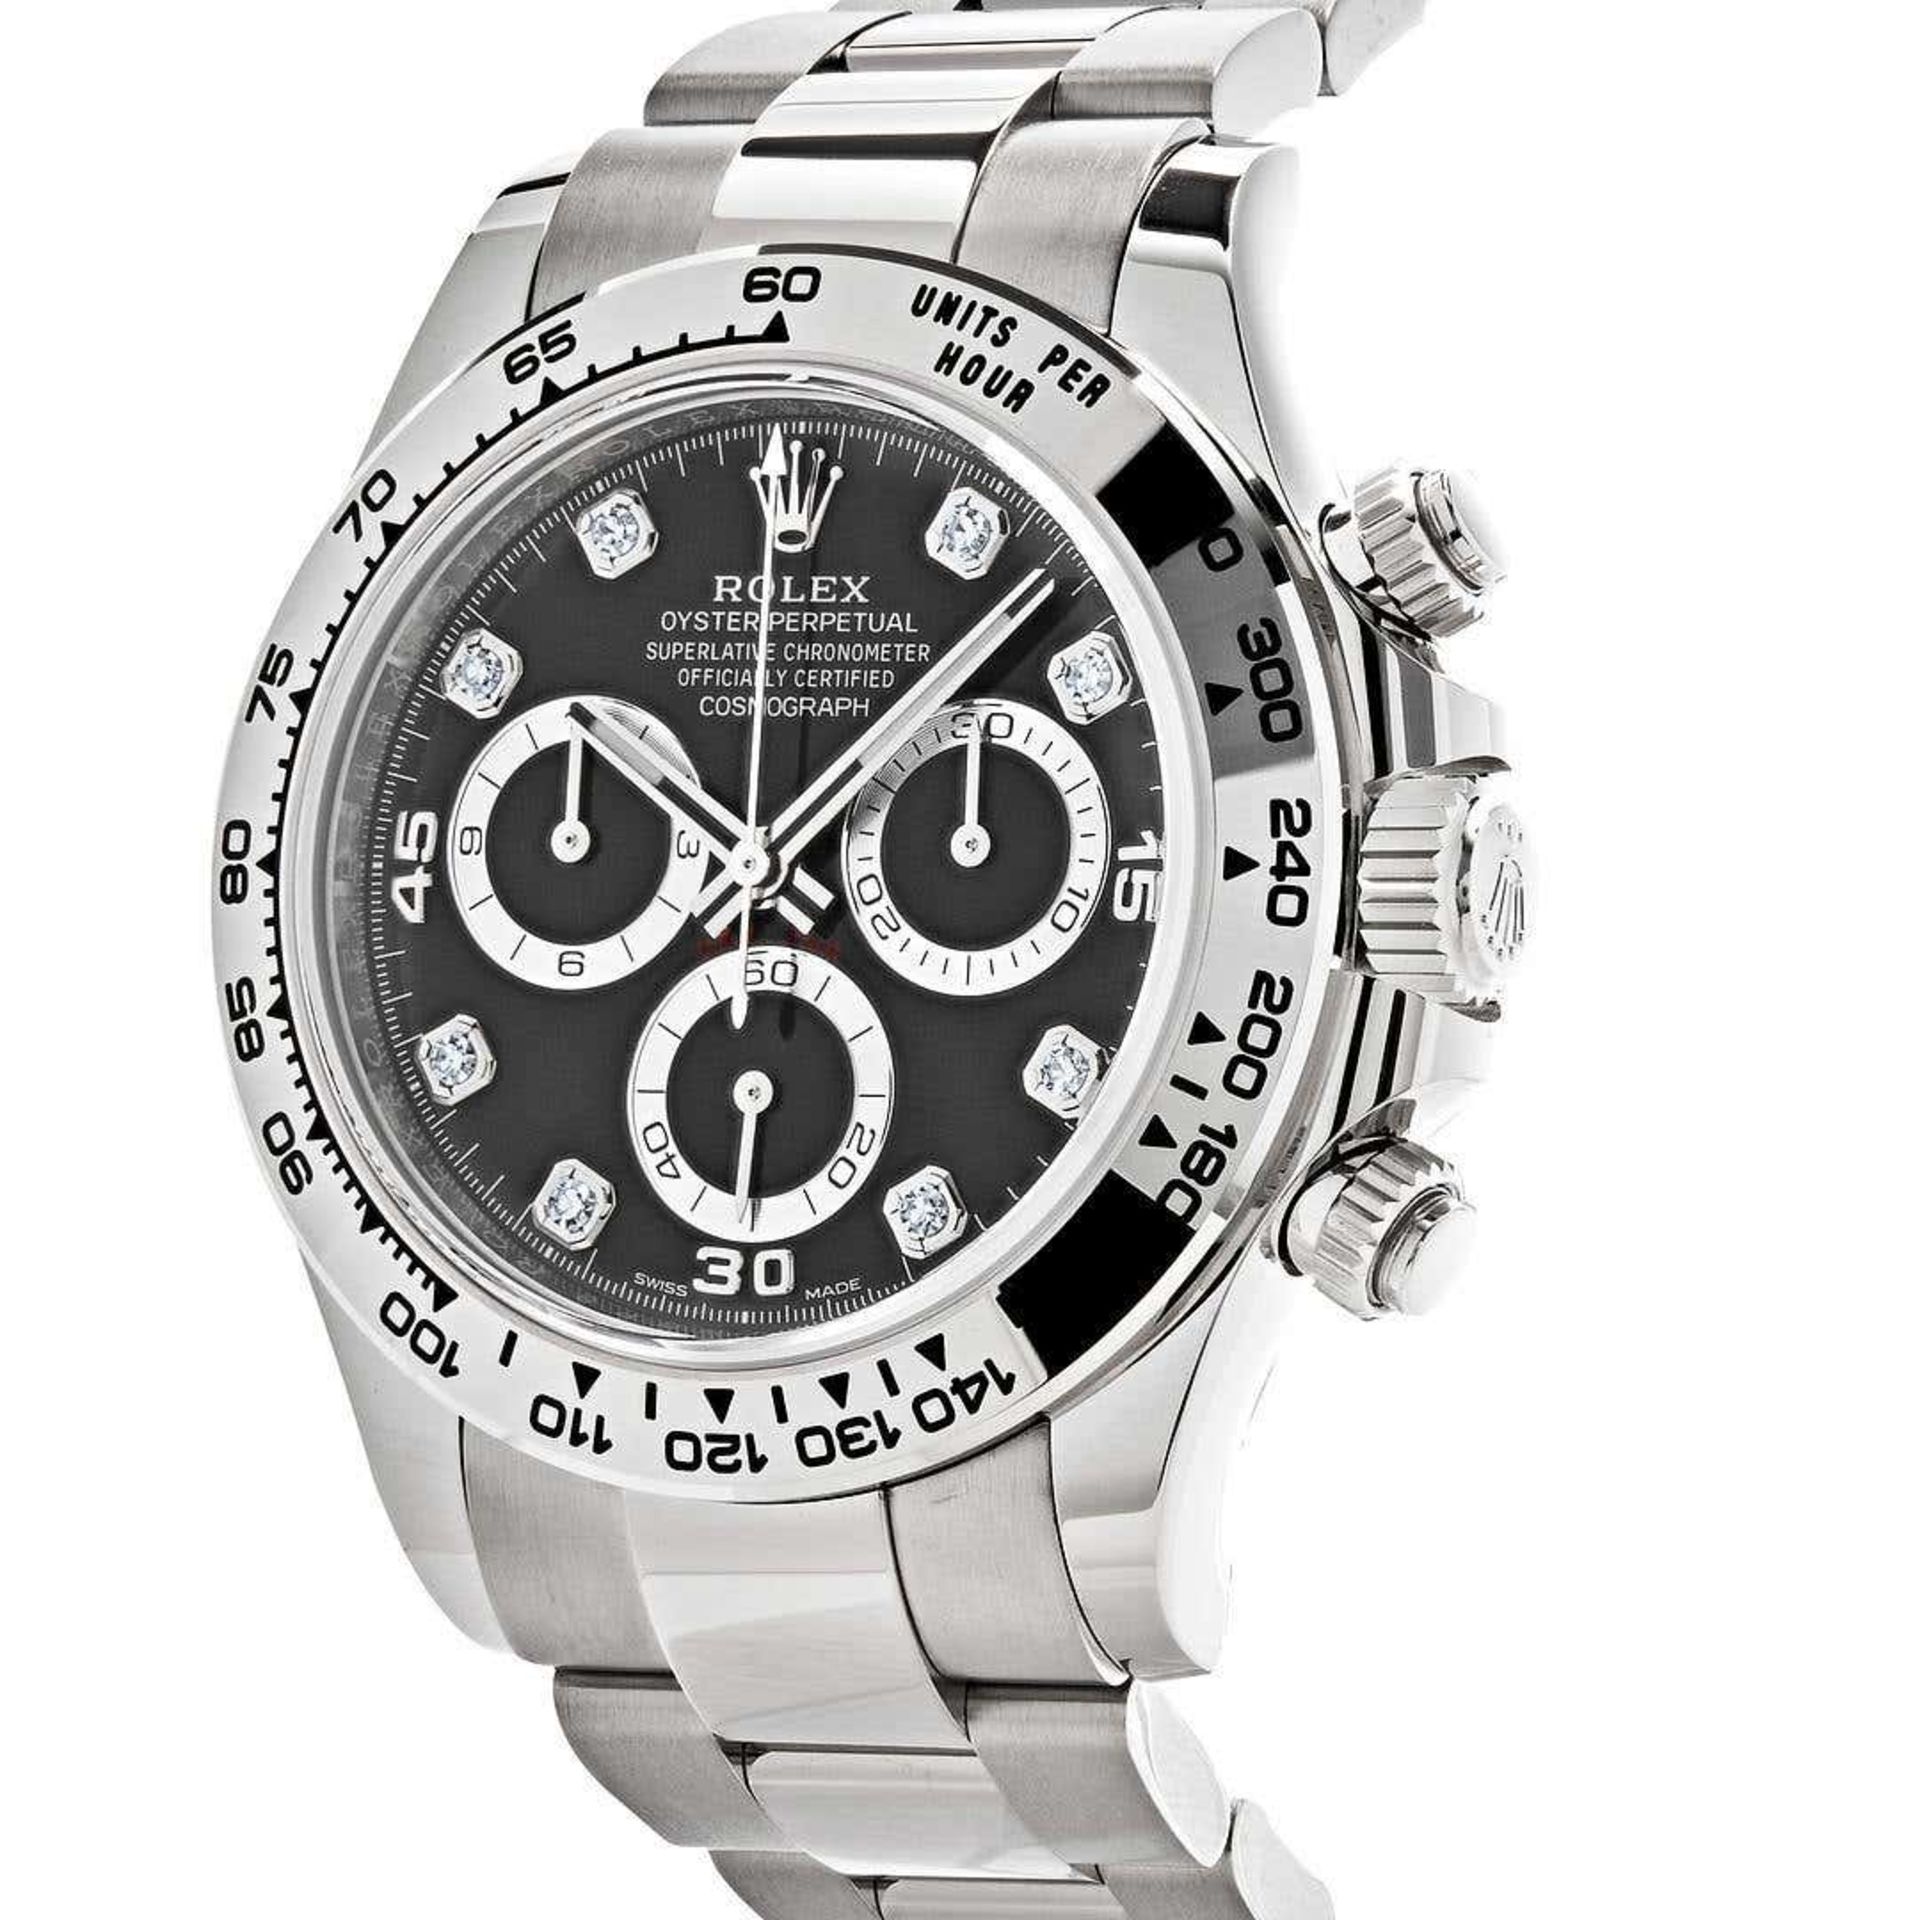 ( ON SALE) ROLEX DAYTONA "WHITE GOLD WITH DIAMOND DIAL" APRIL 2023 - ORIGINAL BOX AND PAPERWORK - - Image 2 of 3